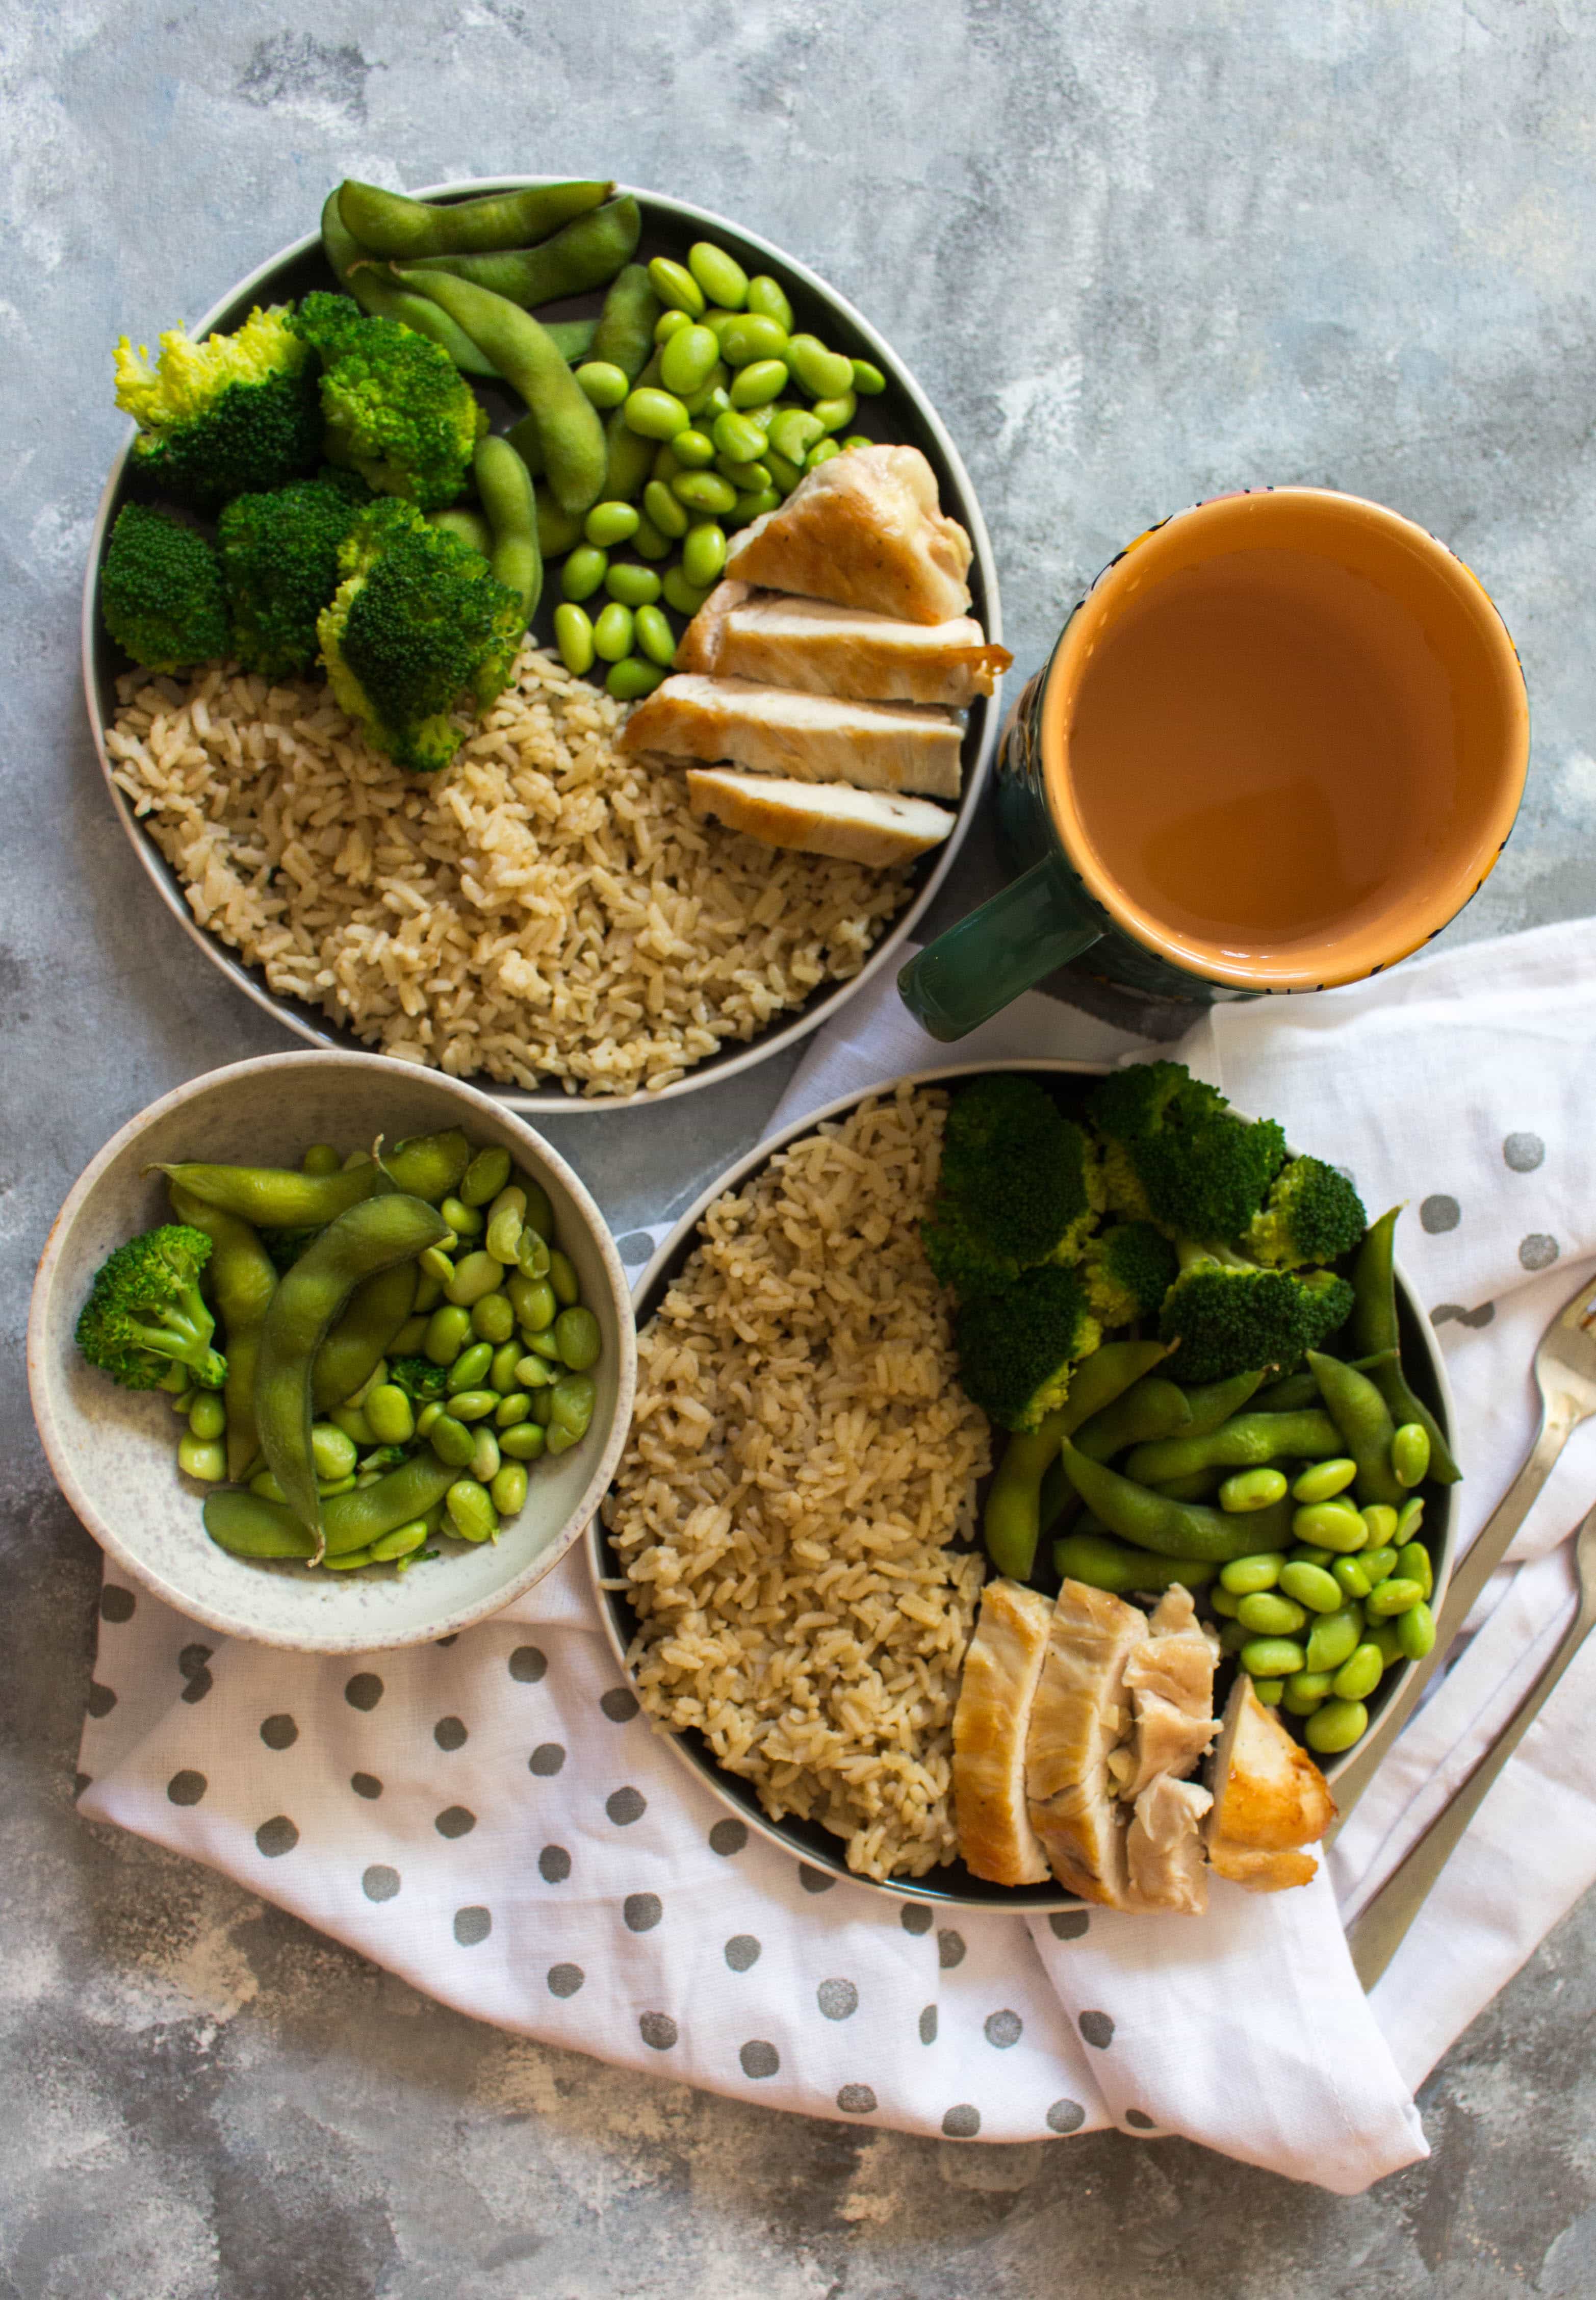 Need an afternoon pickup that fuels you for your after work run? Check out this Green Tea Power Protein Rice Bowl that'll get you ready for your after work run!